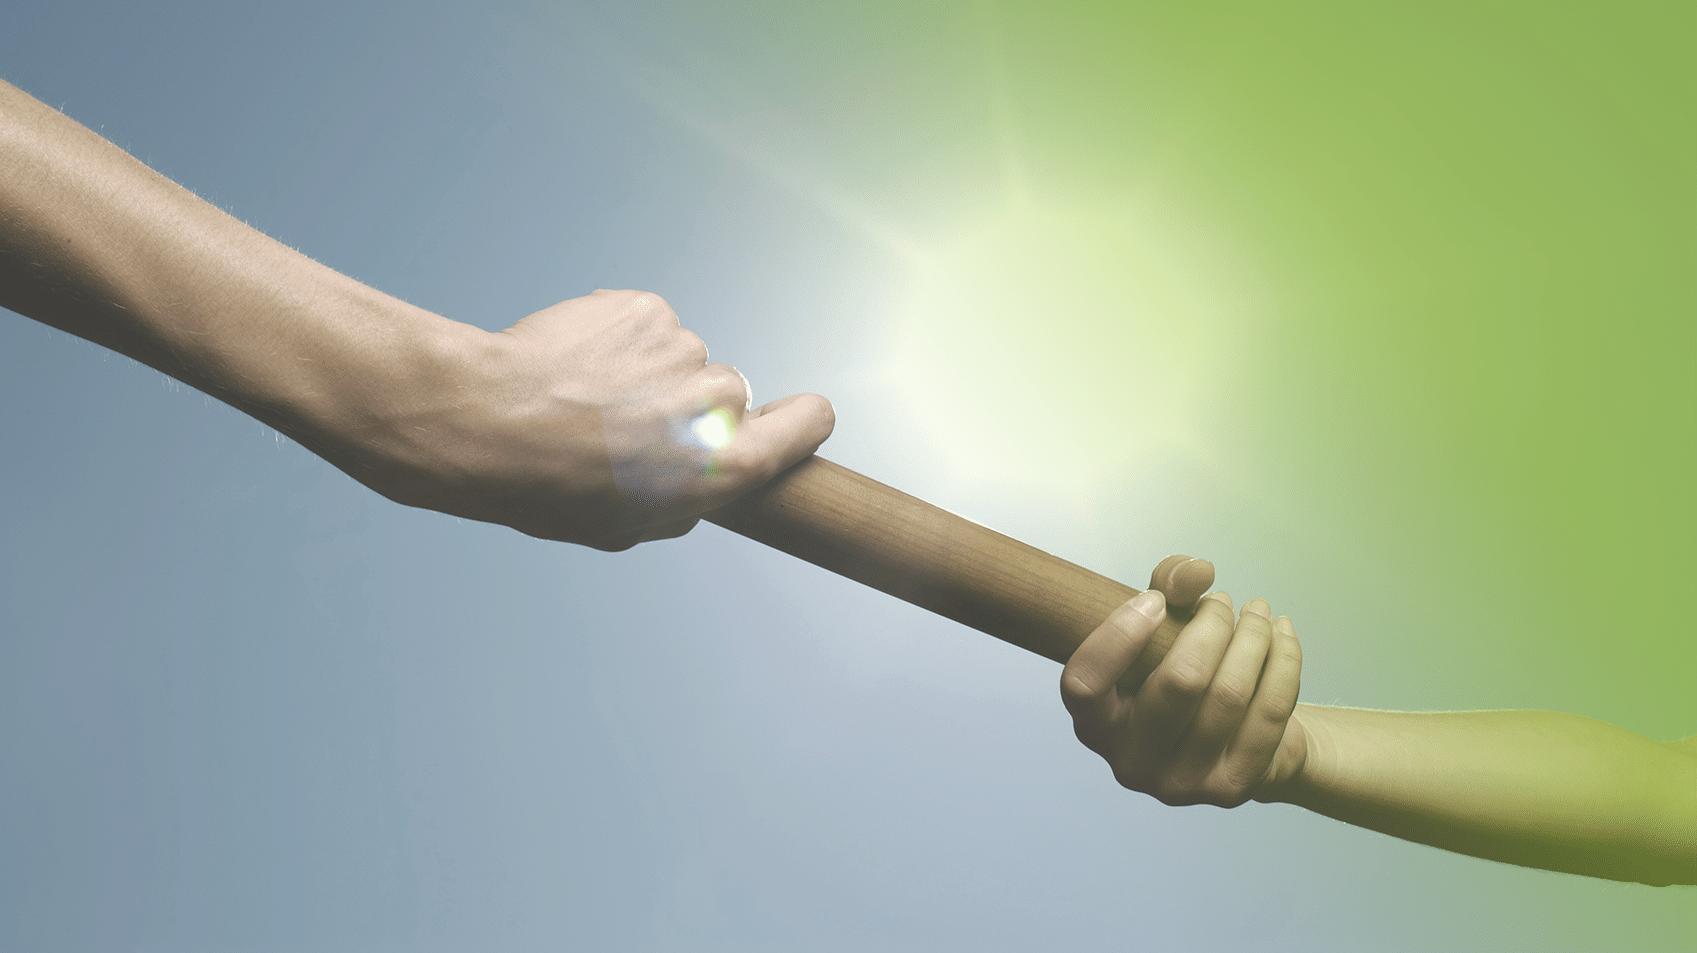 Successful Supply Chain collaboration works like the best baton exchanges